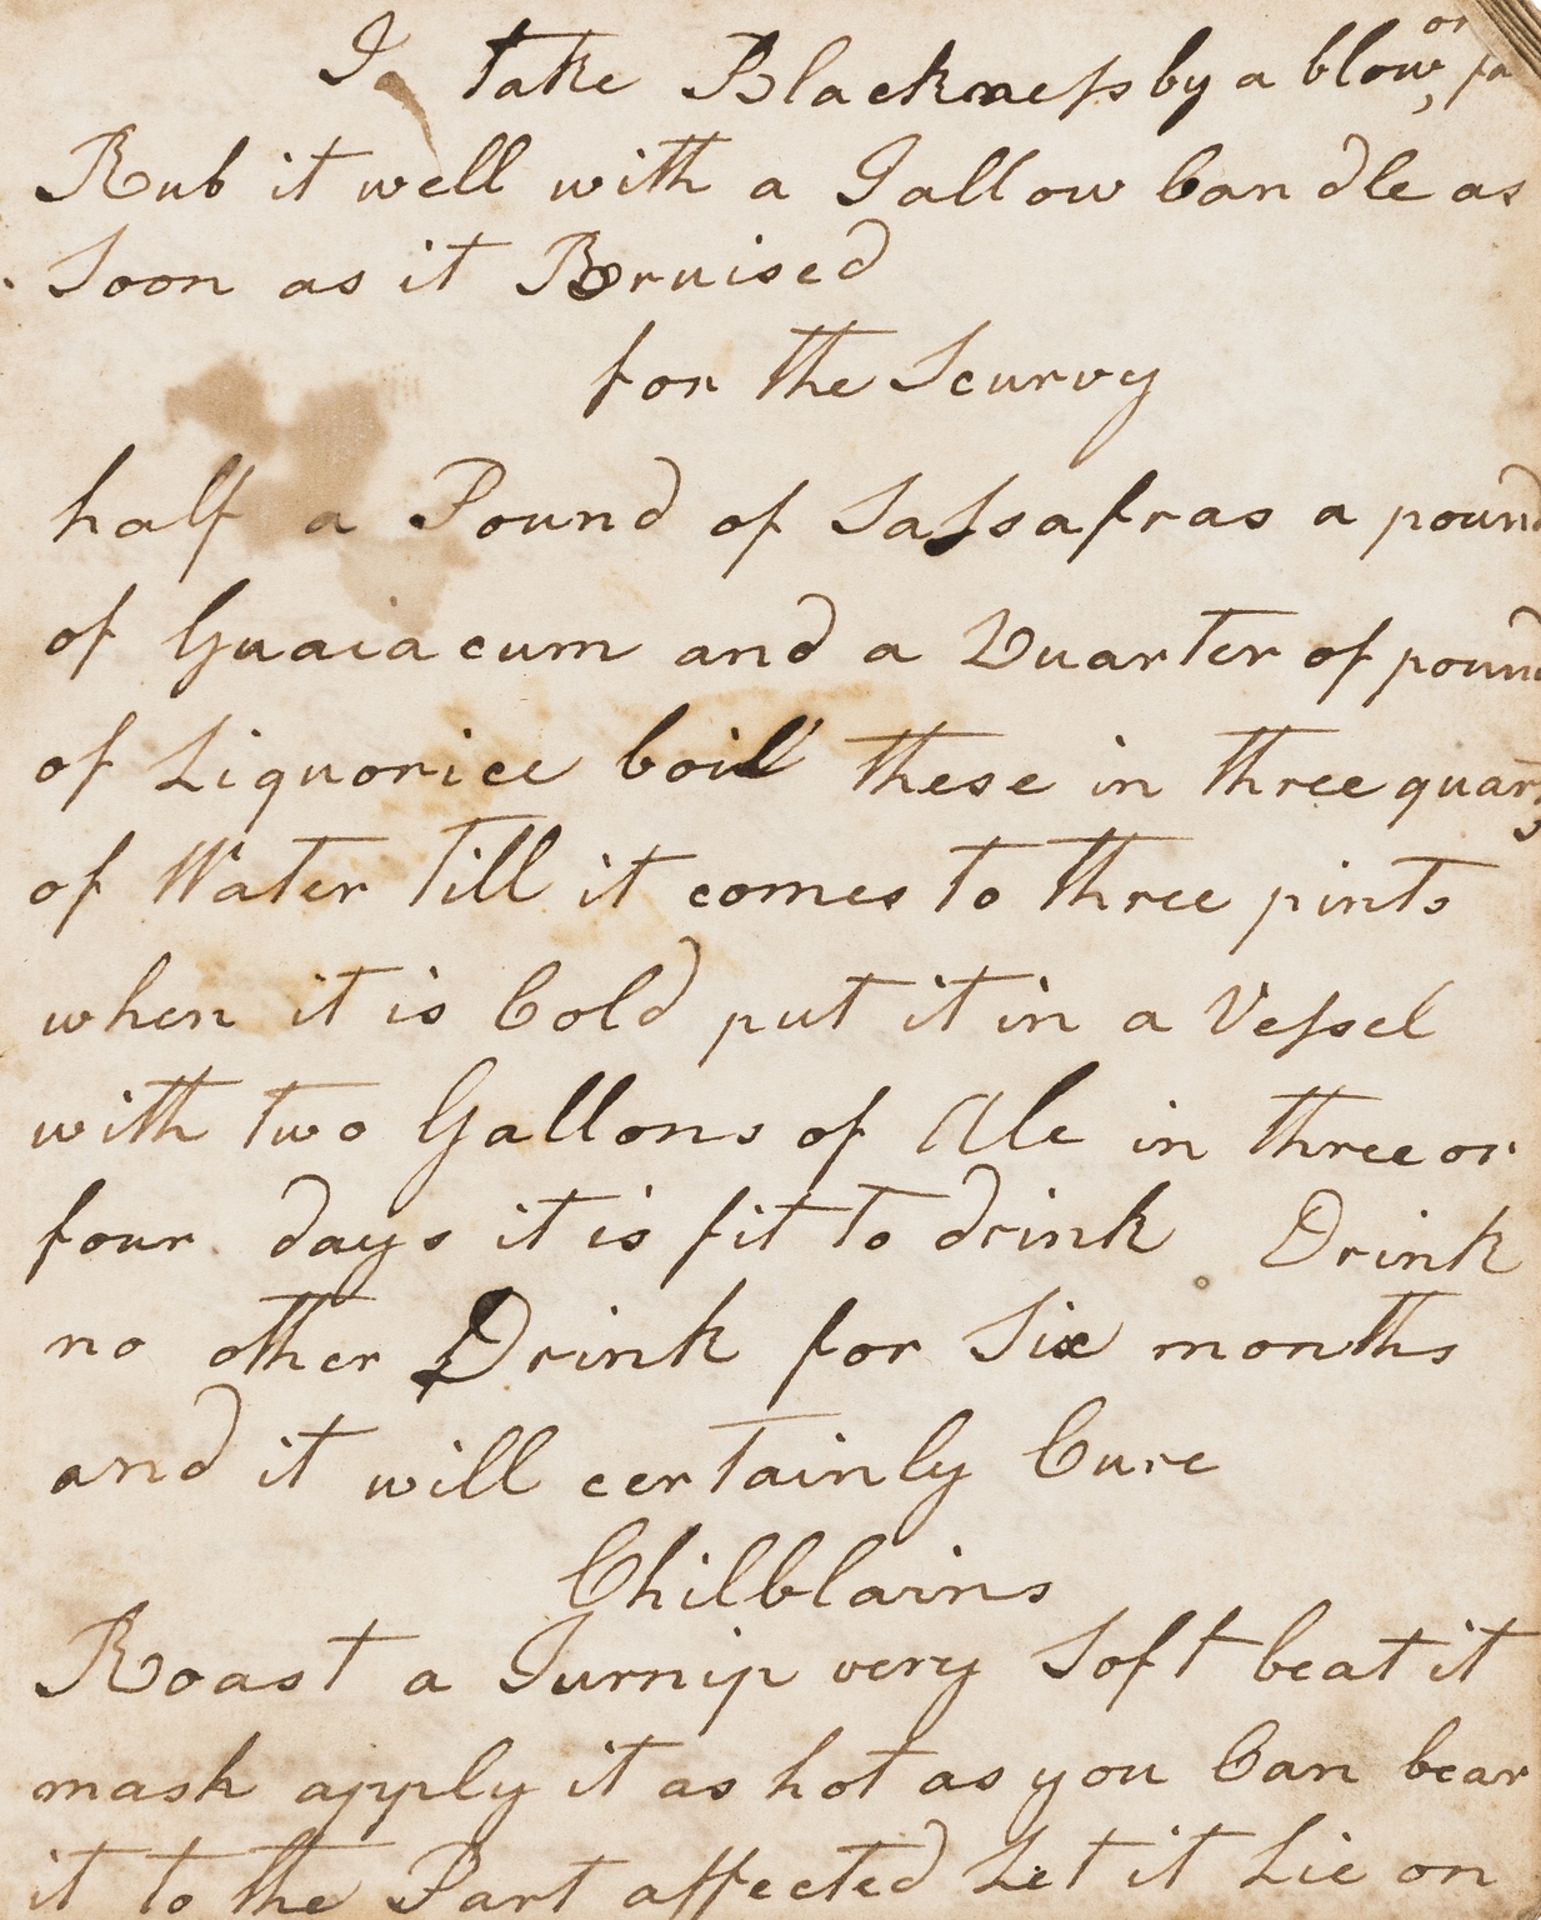 Cookery & other recipes.- [Collection of recipes], manuscript, disbound, [c. 1800].